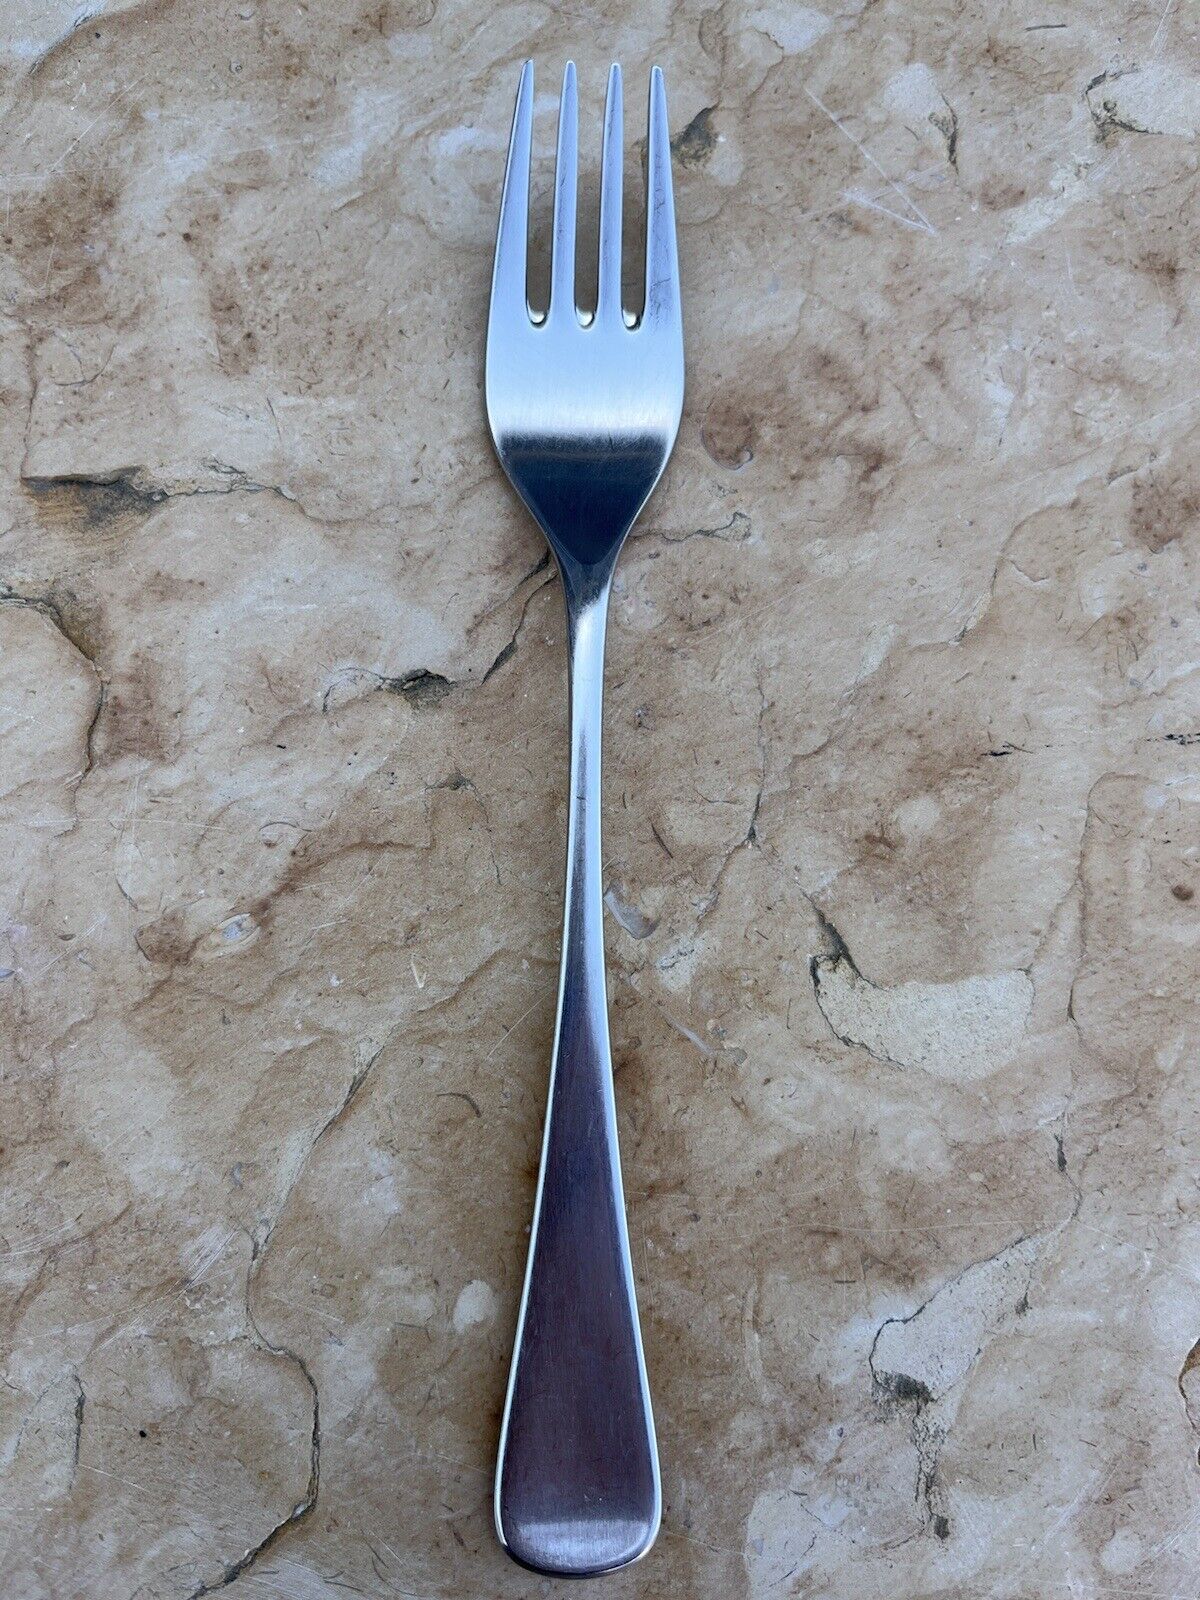 WMF FINESSE Salad or Dessert Fork, 7” Great Condition Satin Finish, Germany